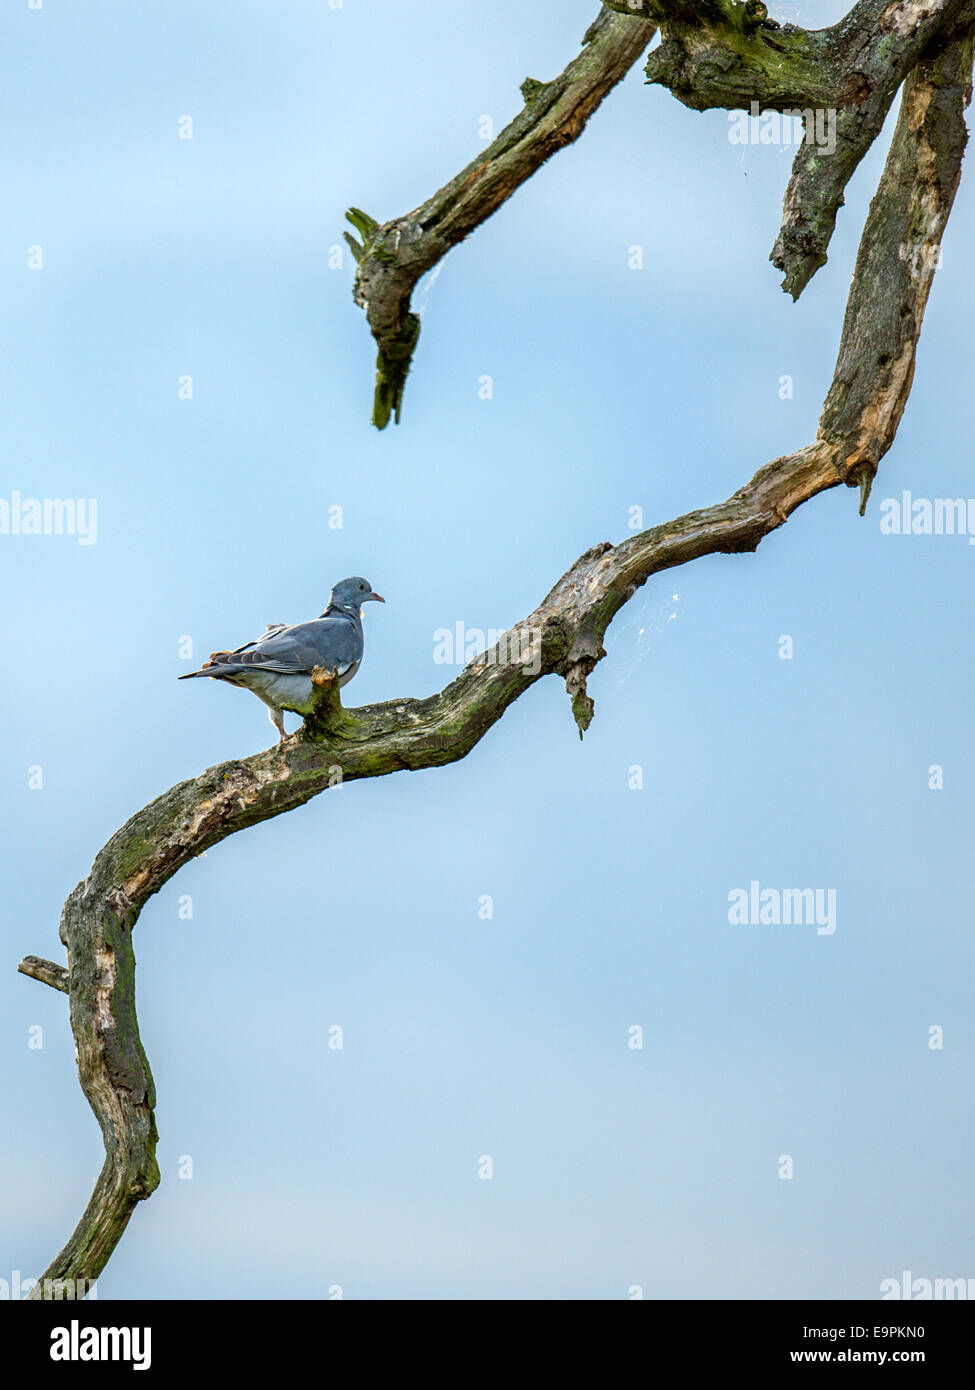 Wild pigeon perched on the branch of a gnarled old tree with a blue sky forming the background. Stock Photo